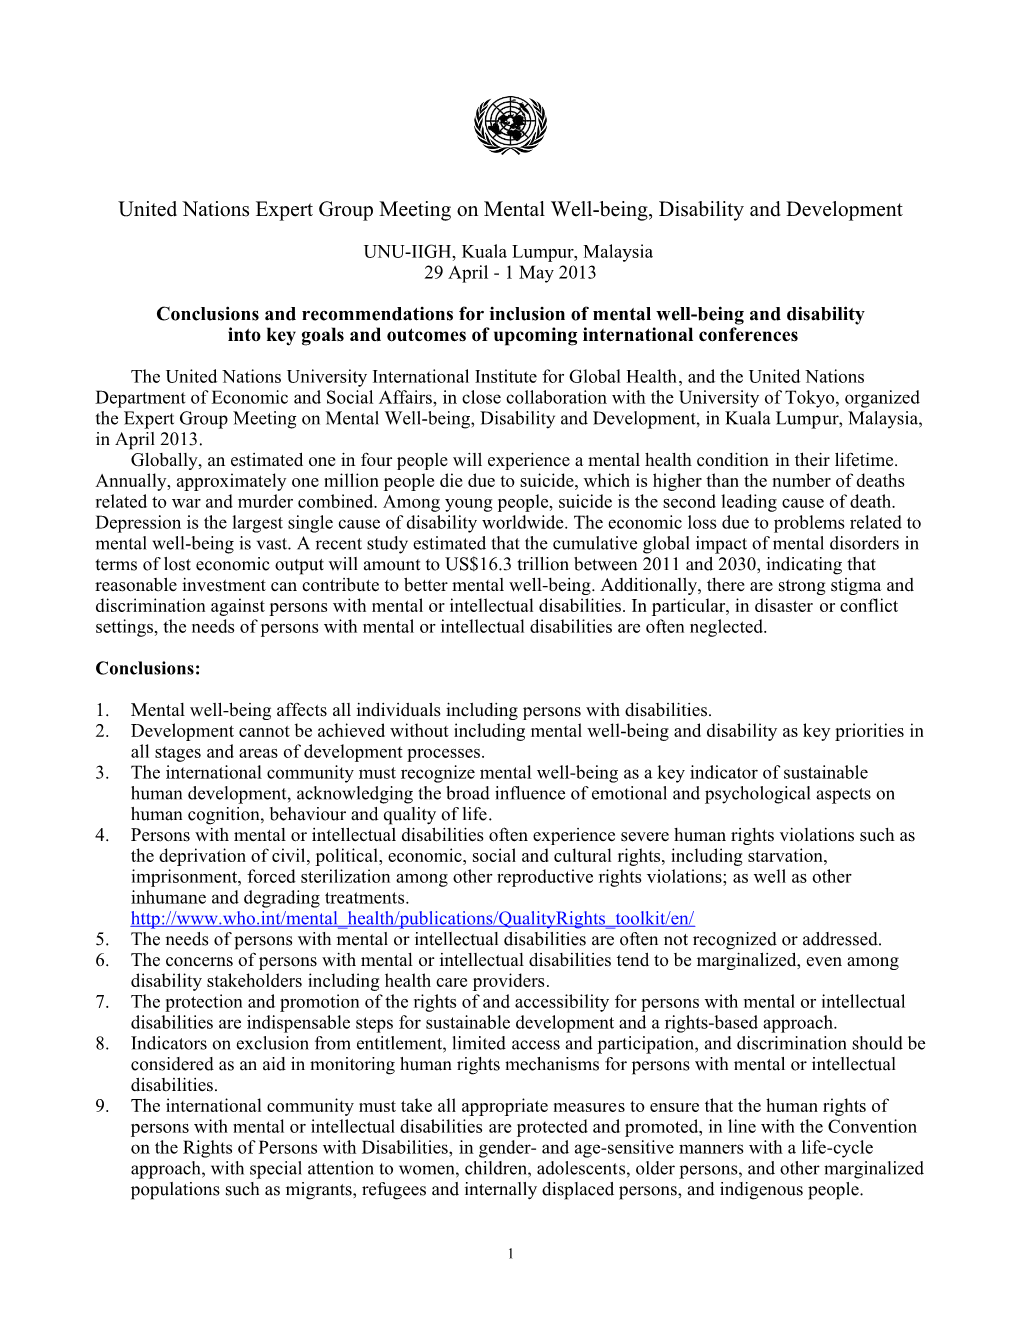 United Nations Expert Group Meeting on Mental Well-Being, Disability and Development